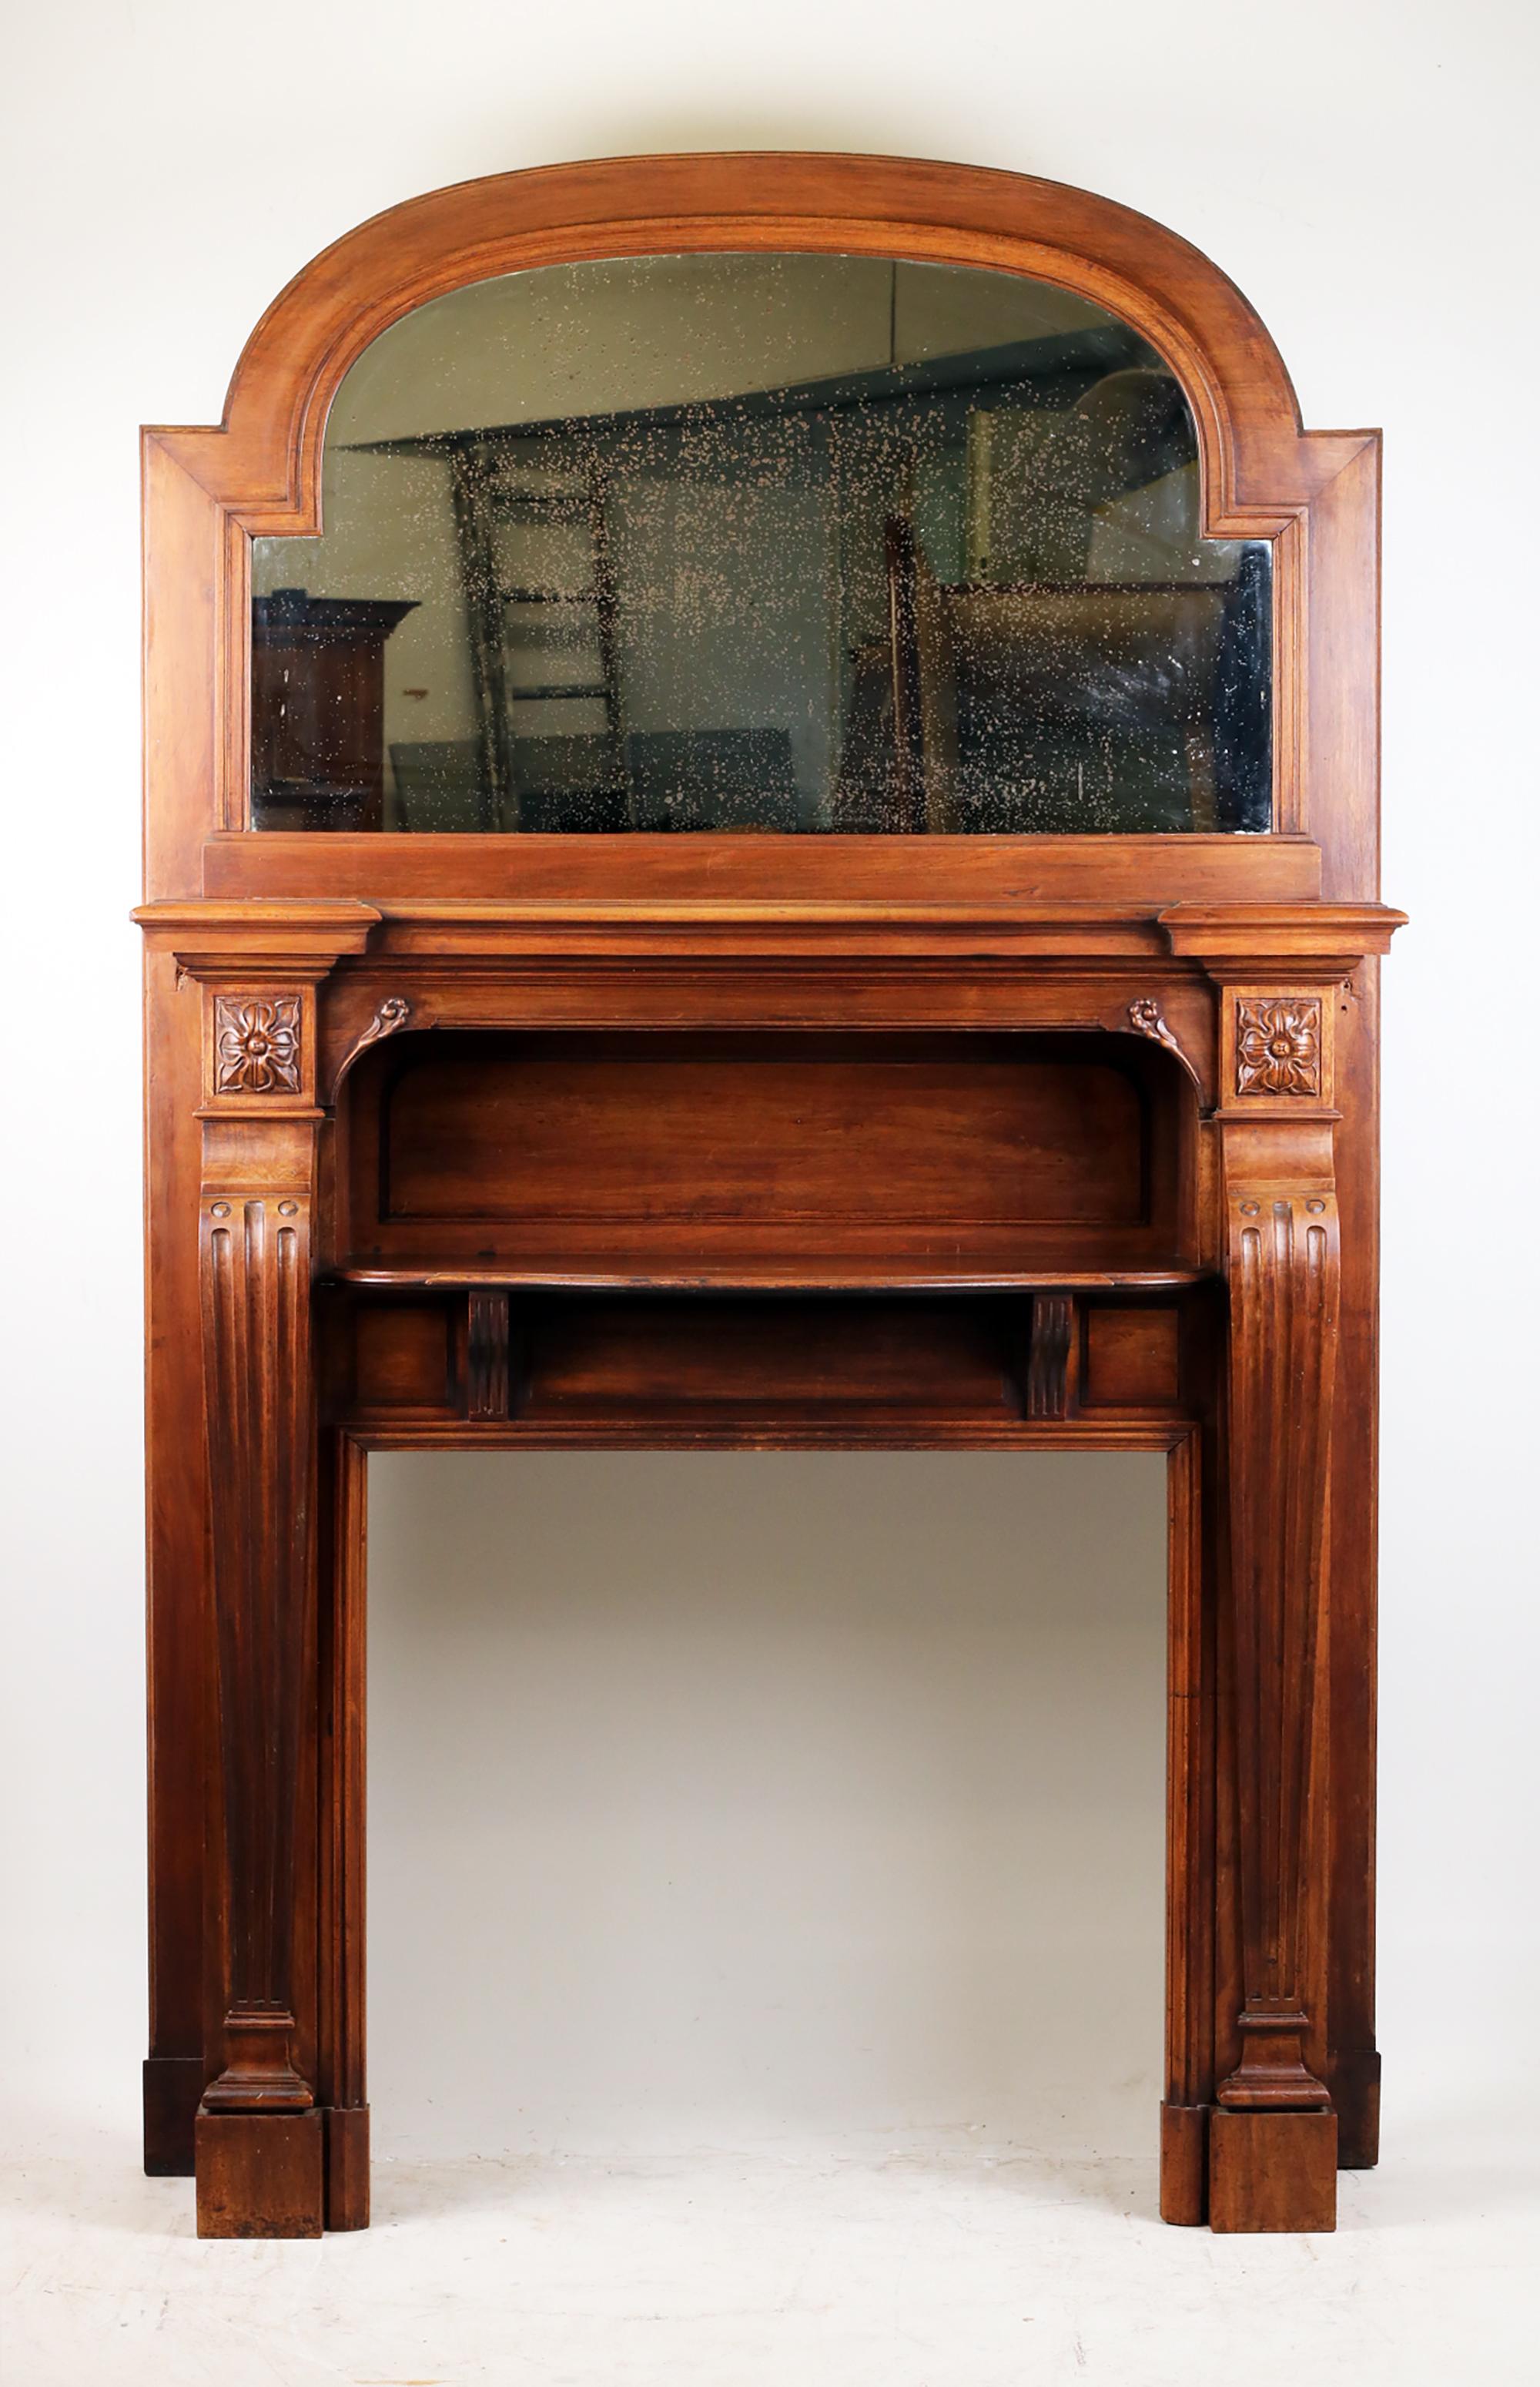 Fire Place Mantel with mirror,
ca. 1870-1880 France,
Solid walnut,

Spectacular French Fire Place Mantel made of solid walnut. 
Tapering pilasters carved with organic reliefs. Original antique mirror (At the customer's request, the mirror can be